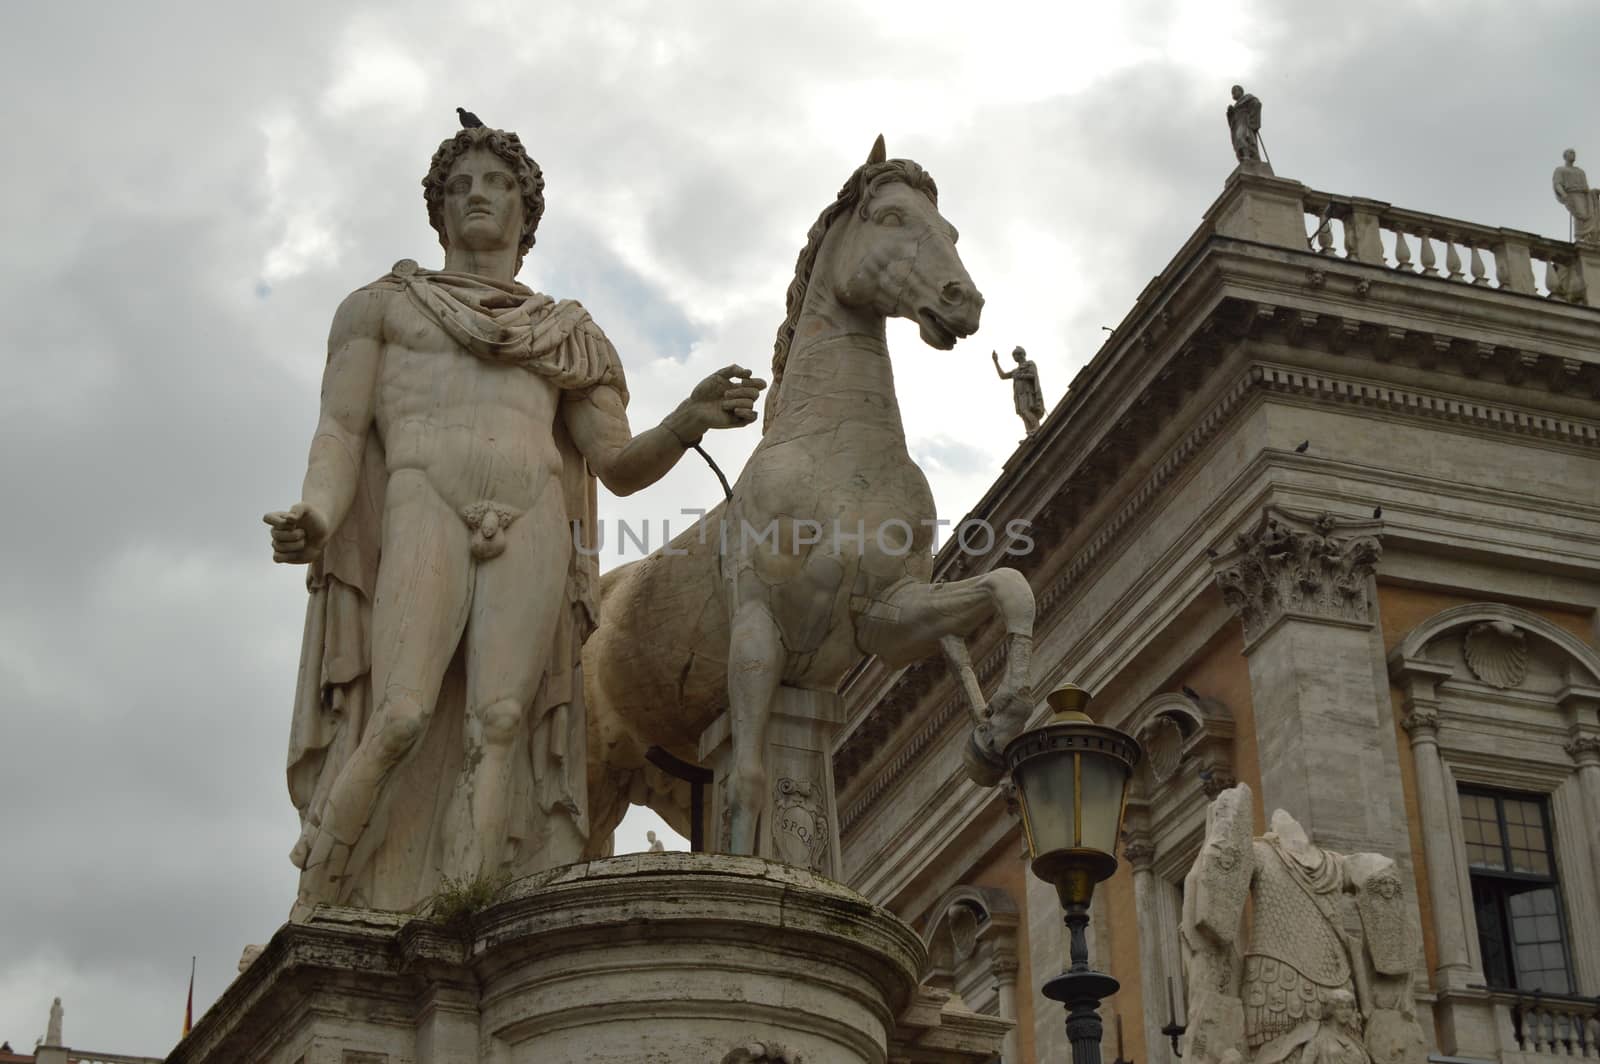 Marble statues of the Dioscuri castor and Pollux at the top of the Capitoline hill and Piazza Campidoglio in Rome, Italy, October 07, 2018.